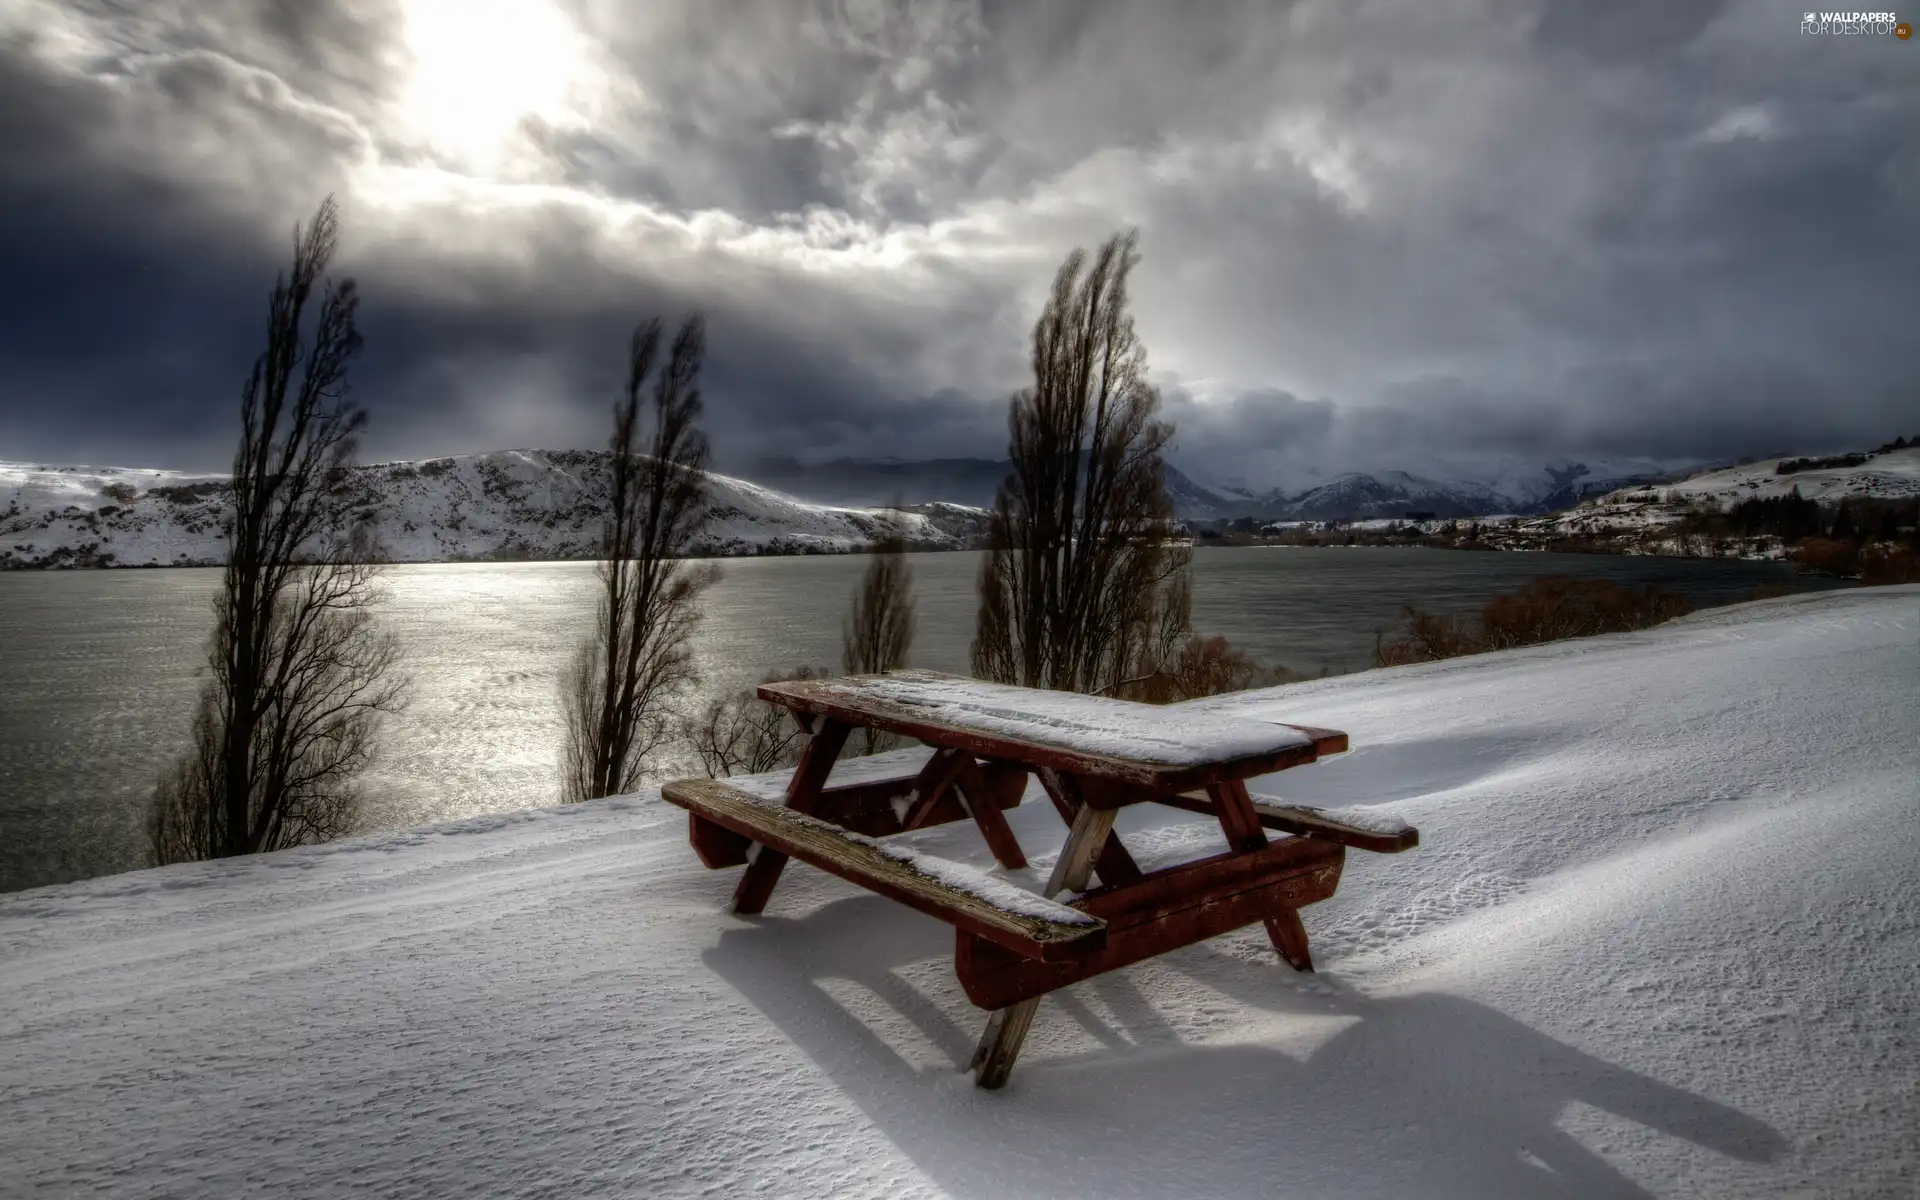 clouds, River, Bench, Mountains